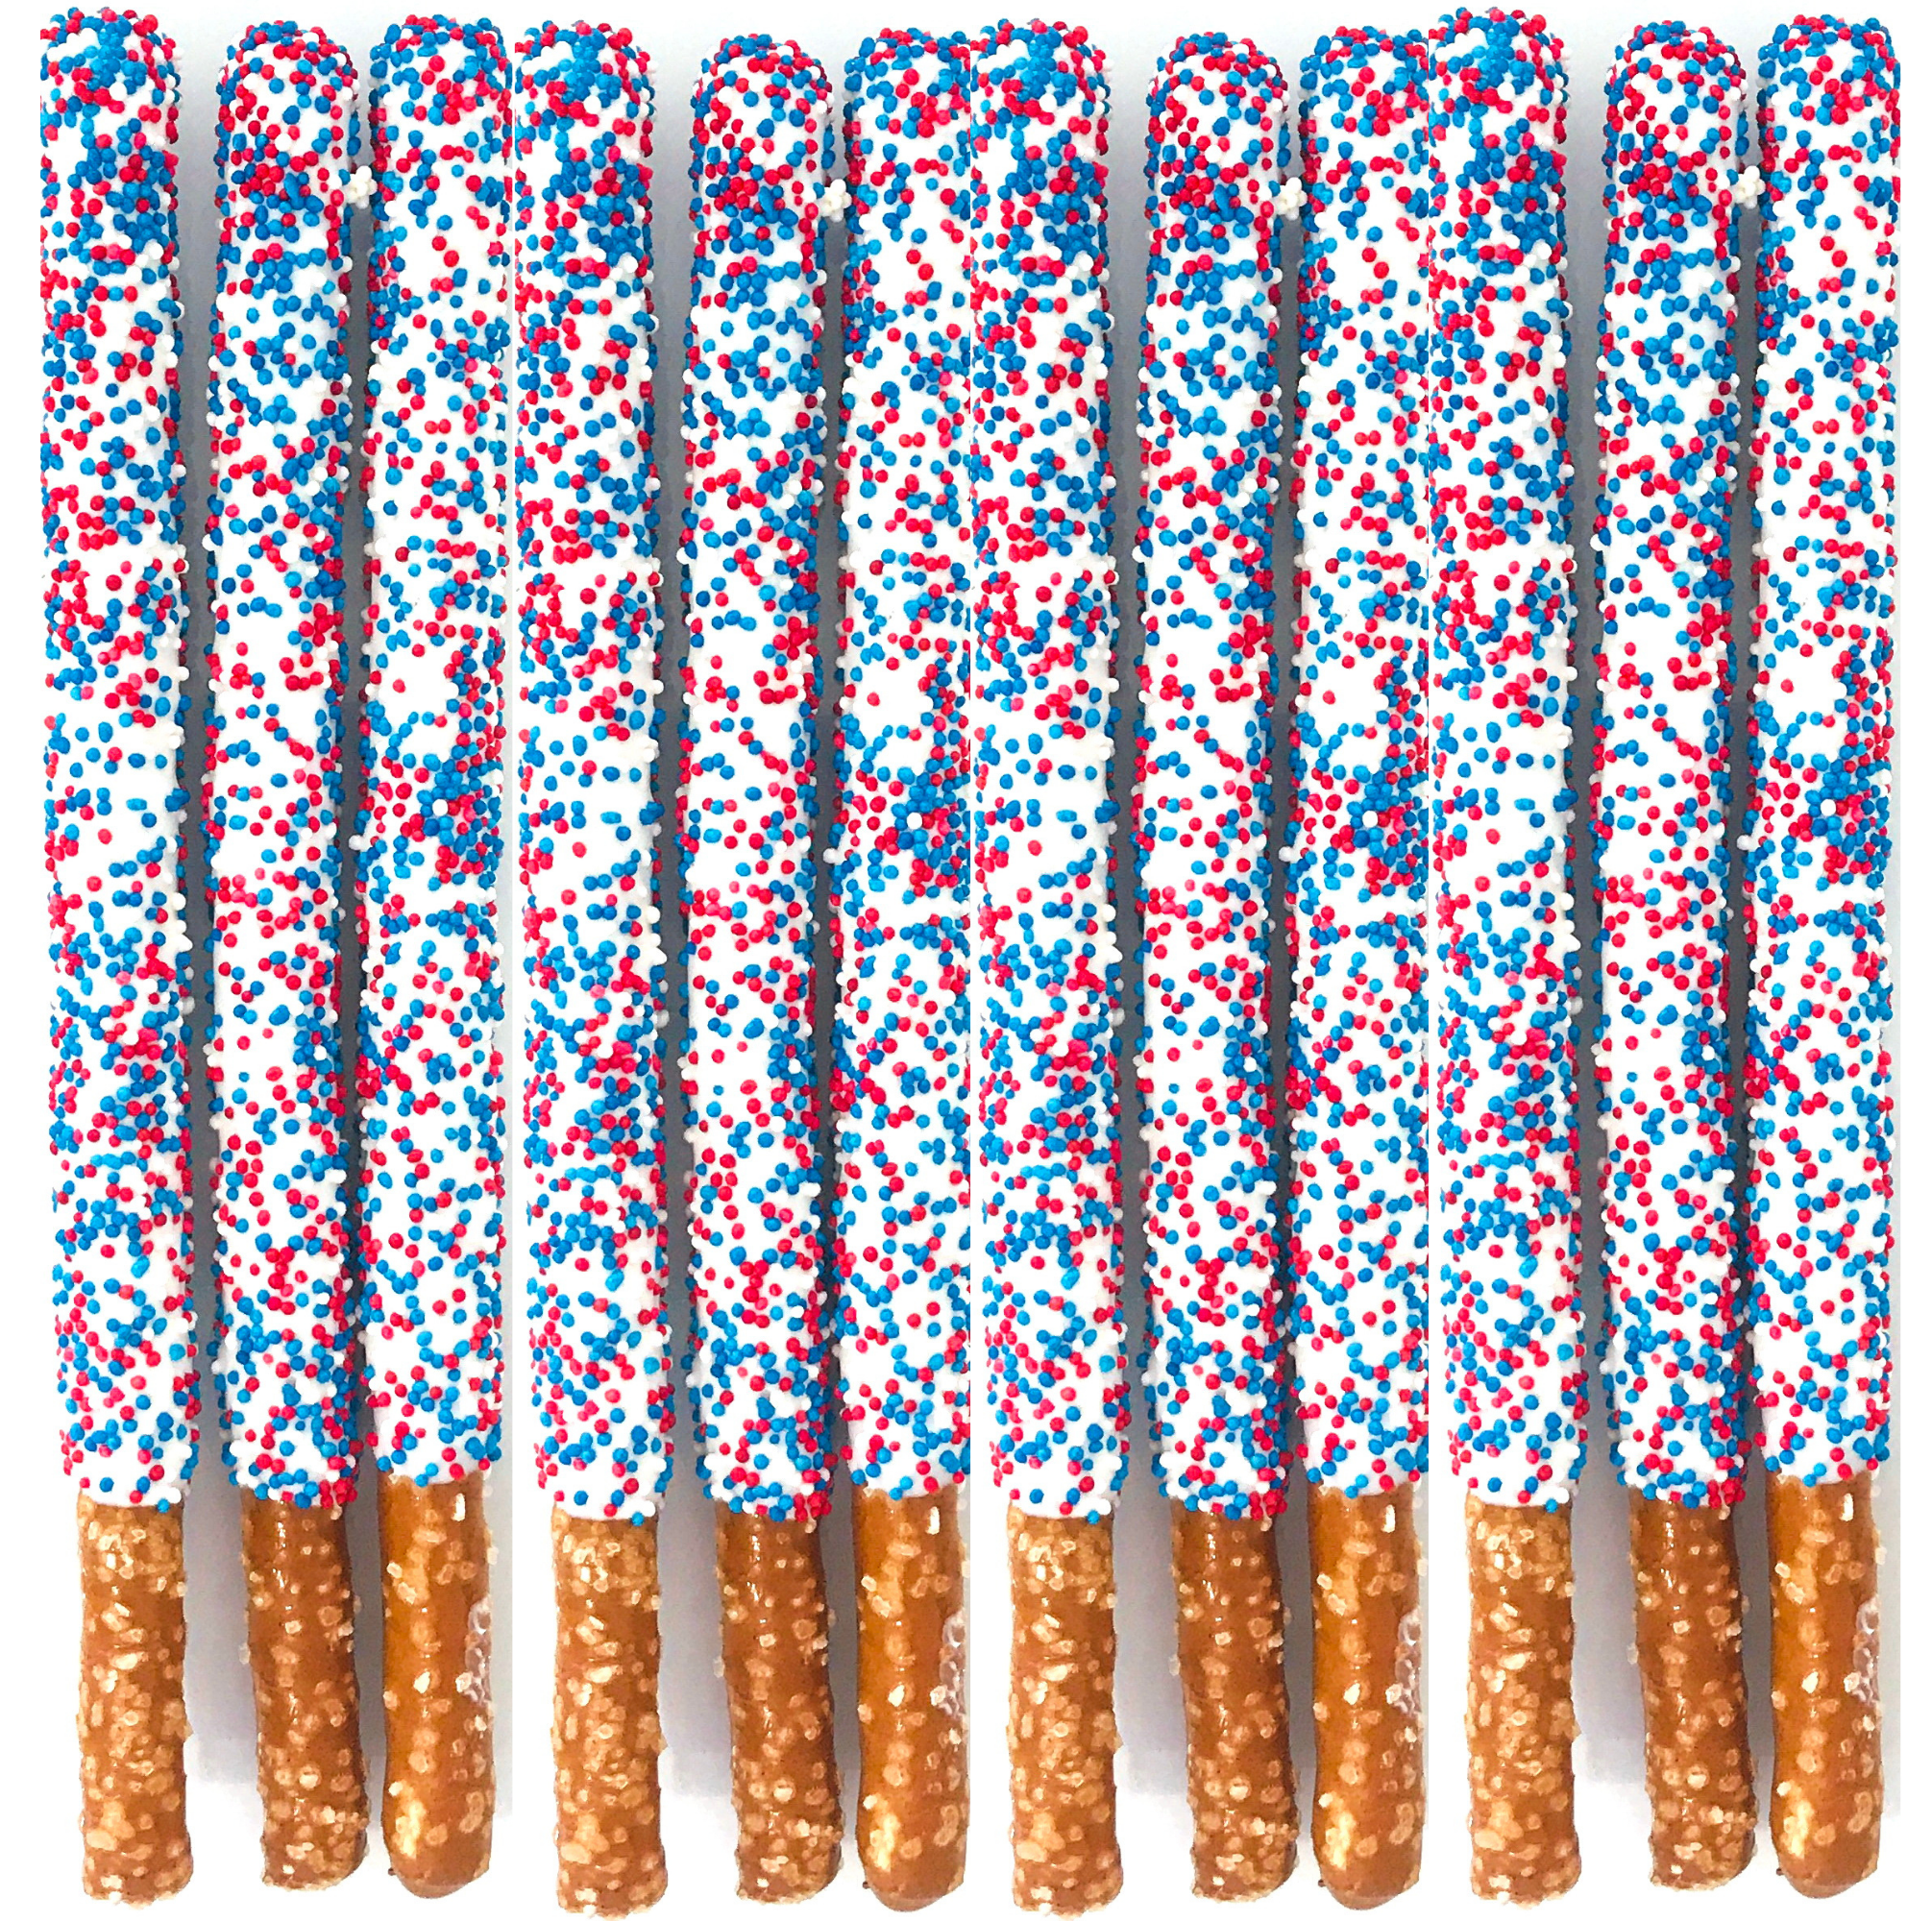 Patriotic White Chocolate Covered Pretzel Rods - Topped With Red, White, & Blue Mixed Sprinkles